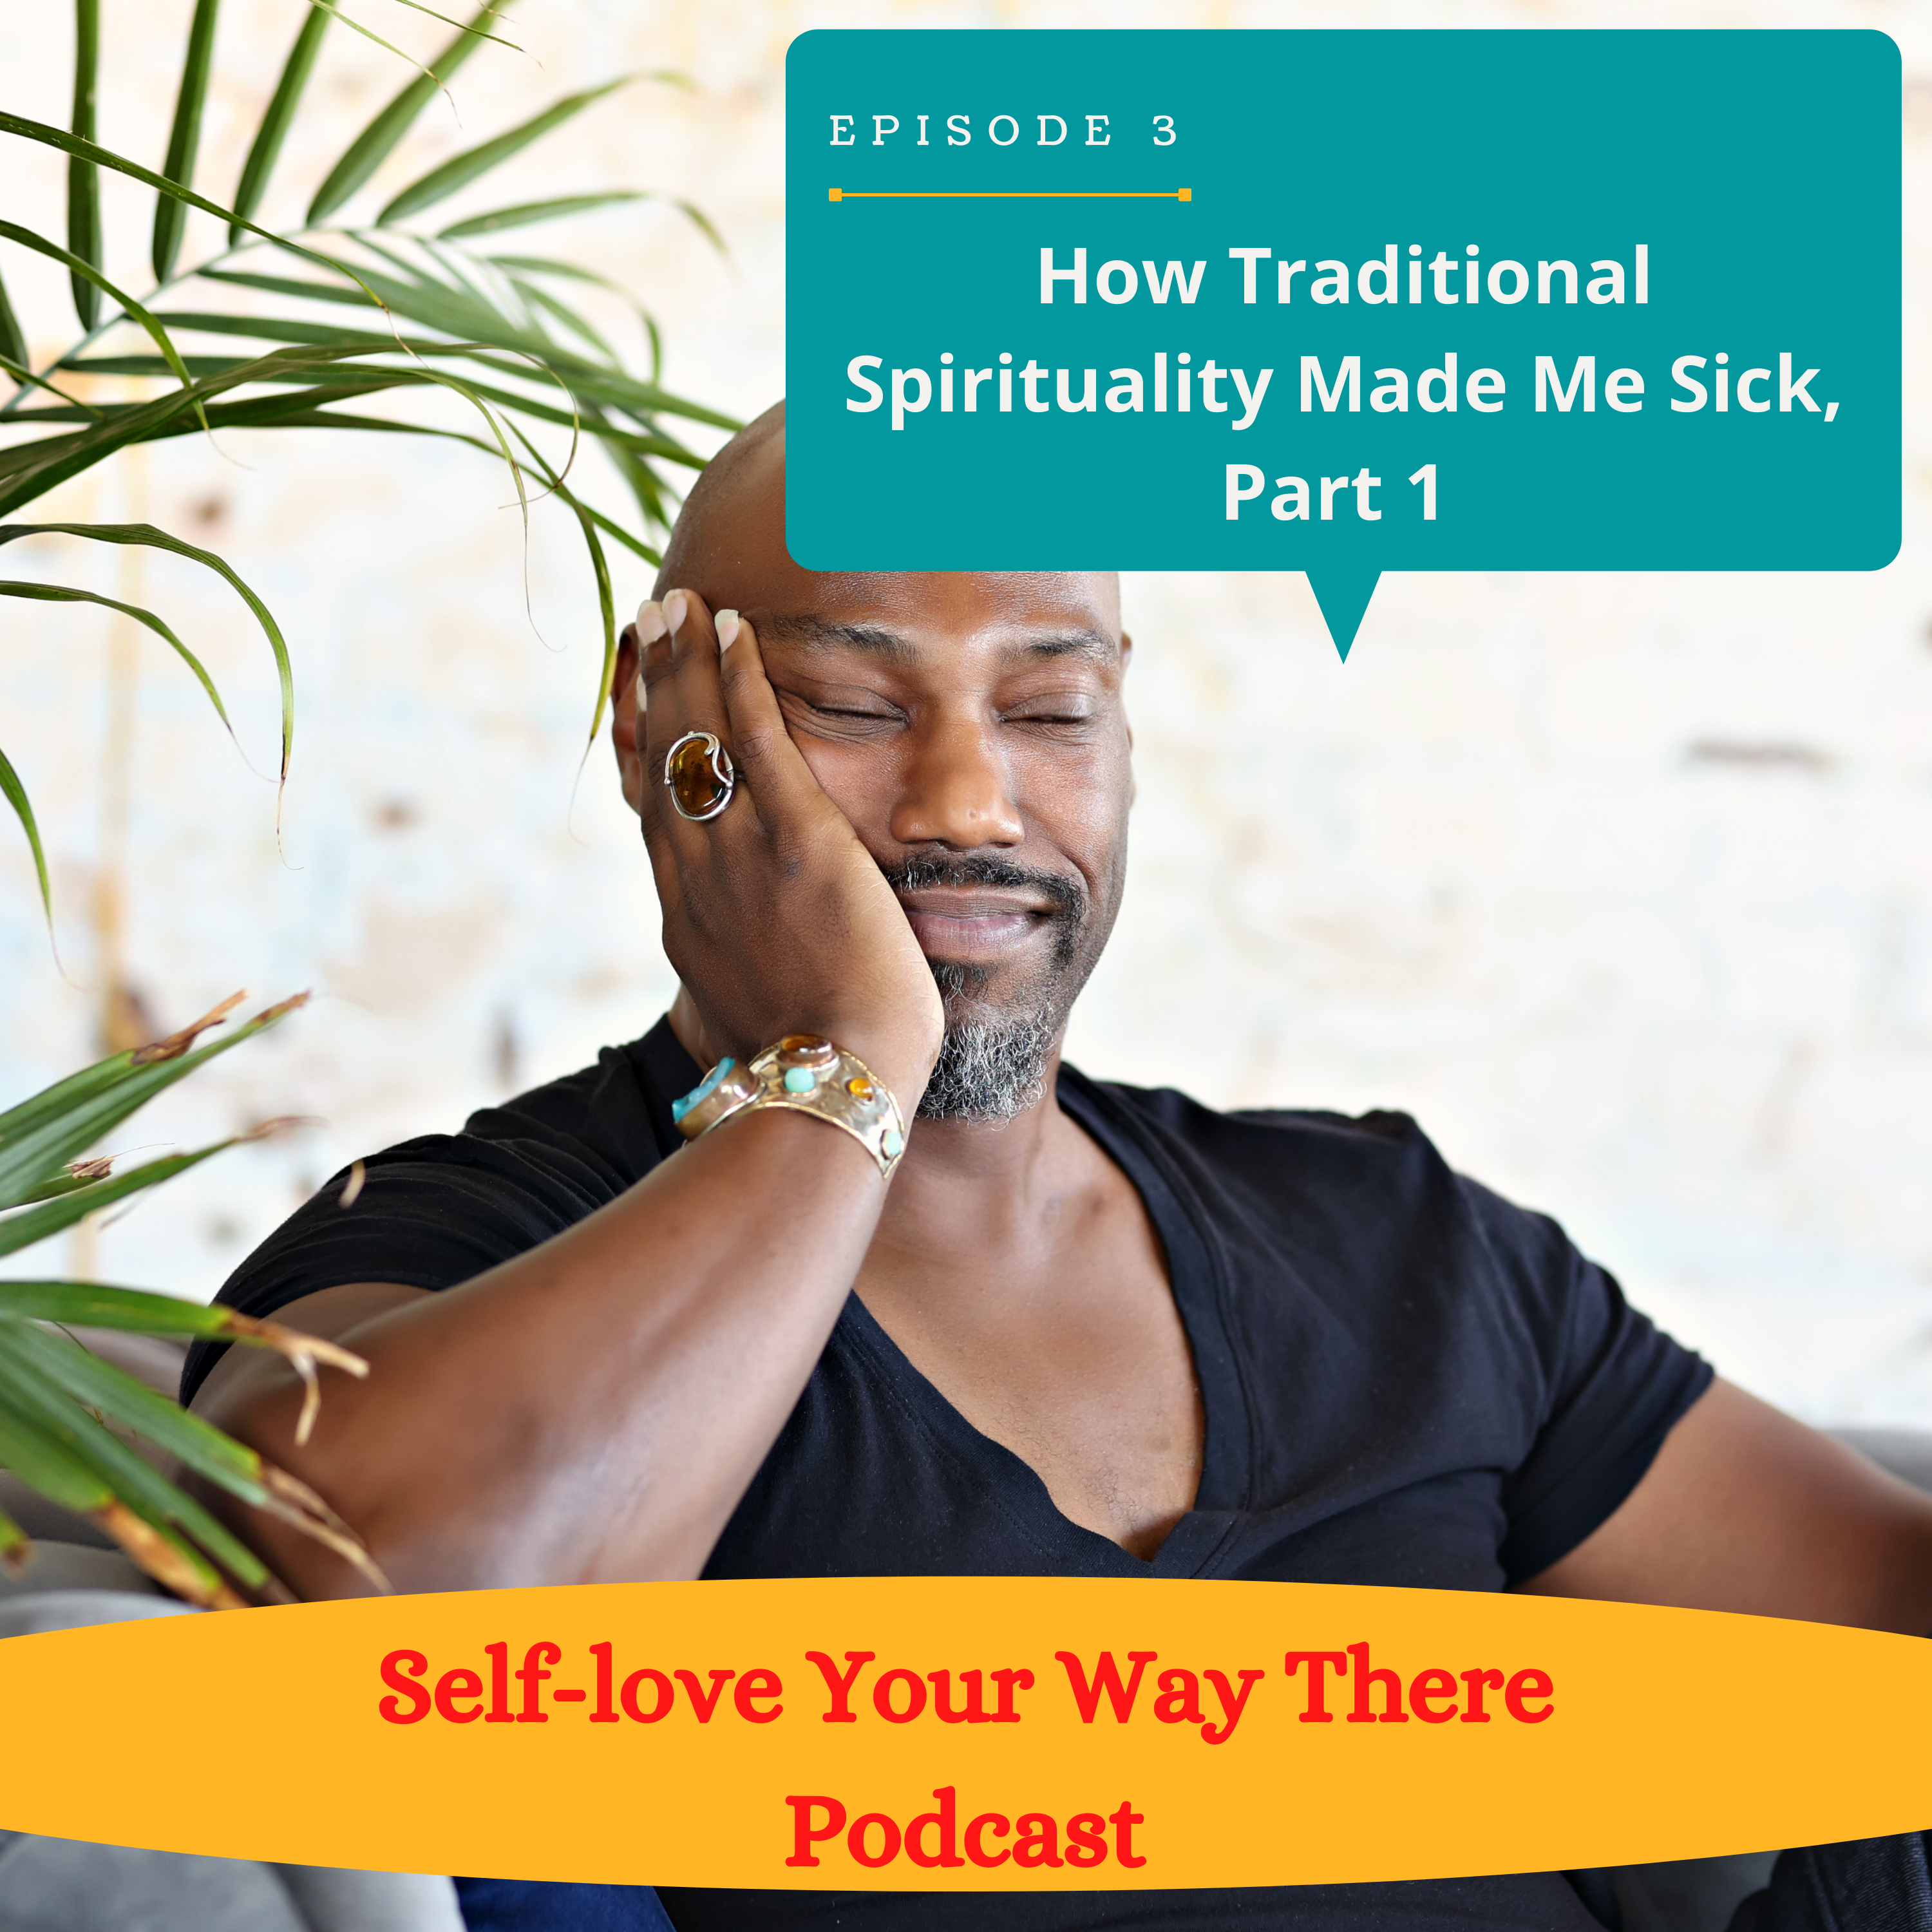 How Traditional Spirituality Made Me Sick, Part 1